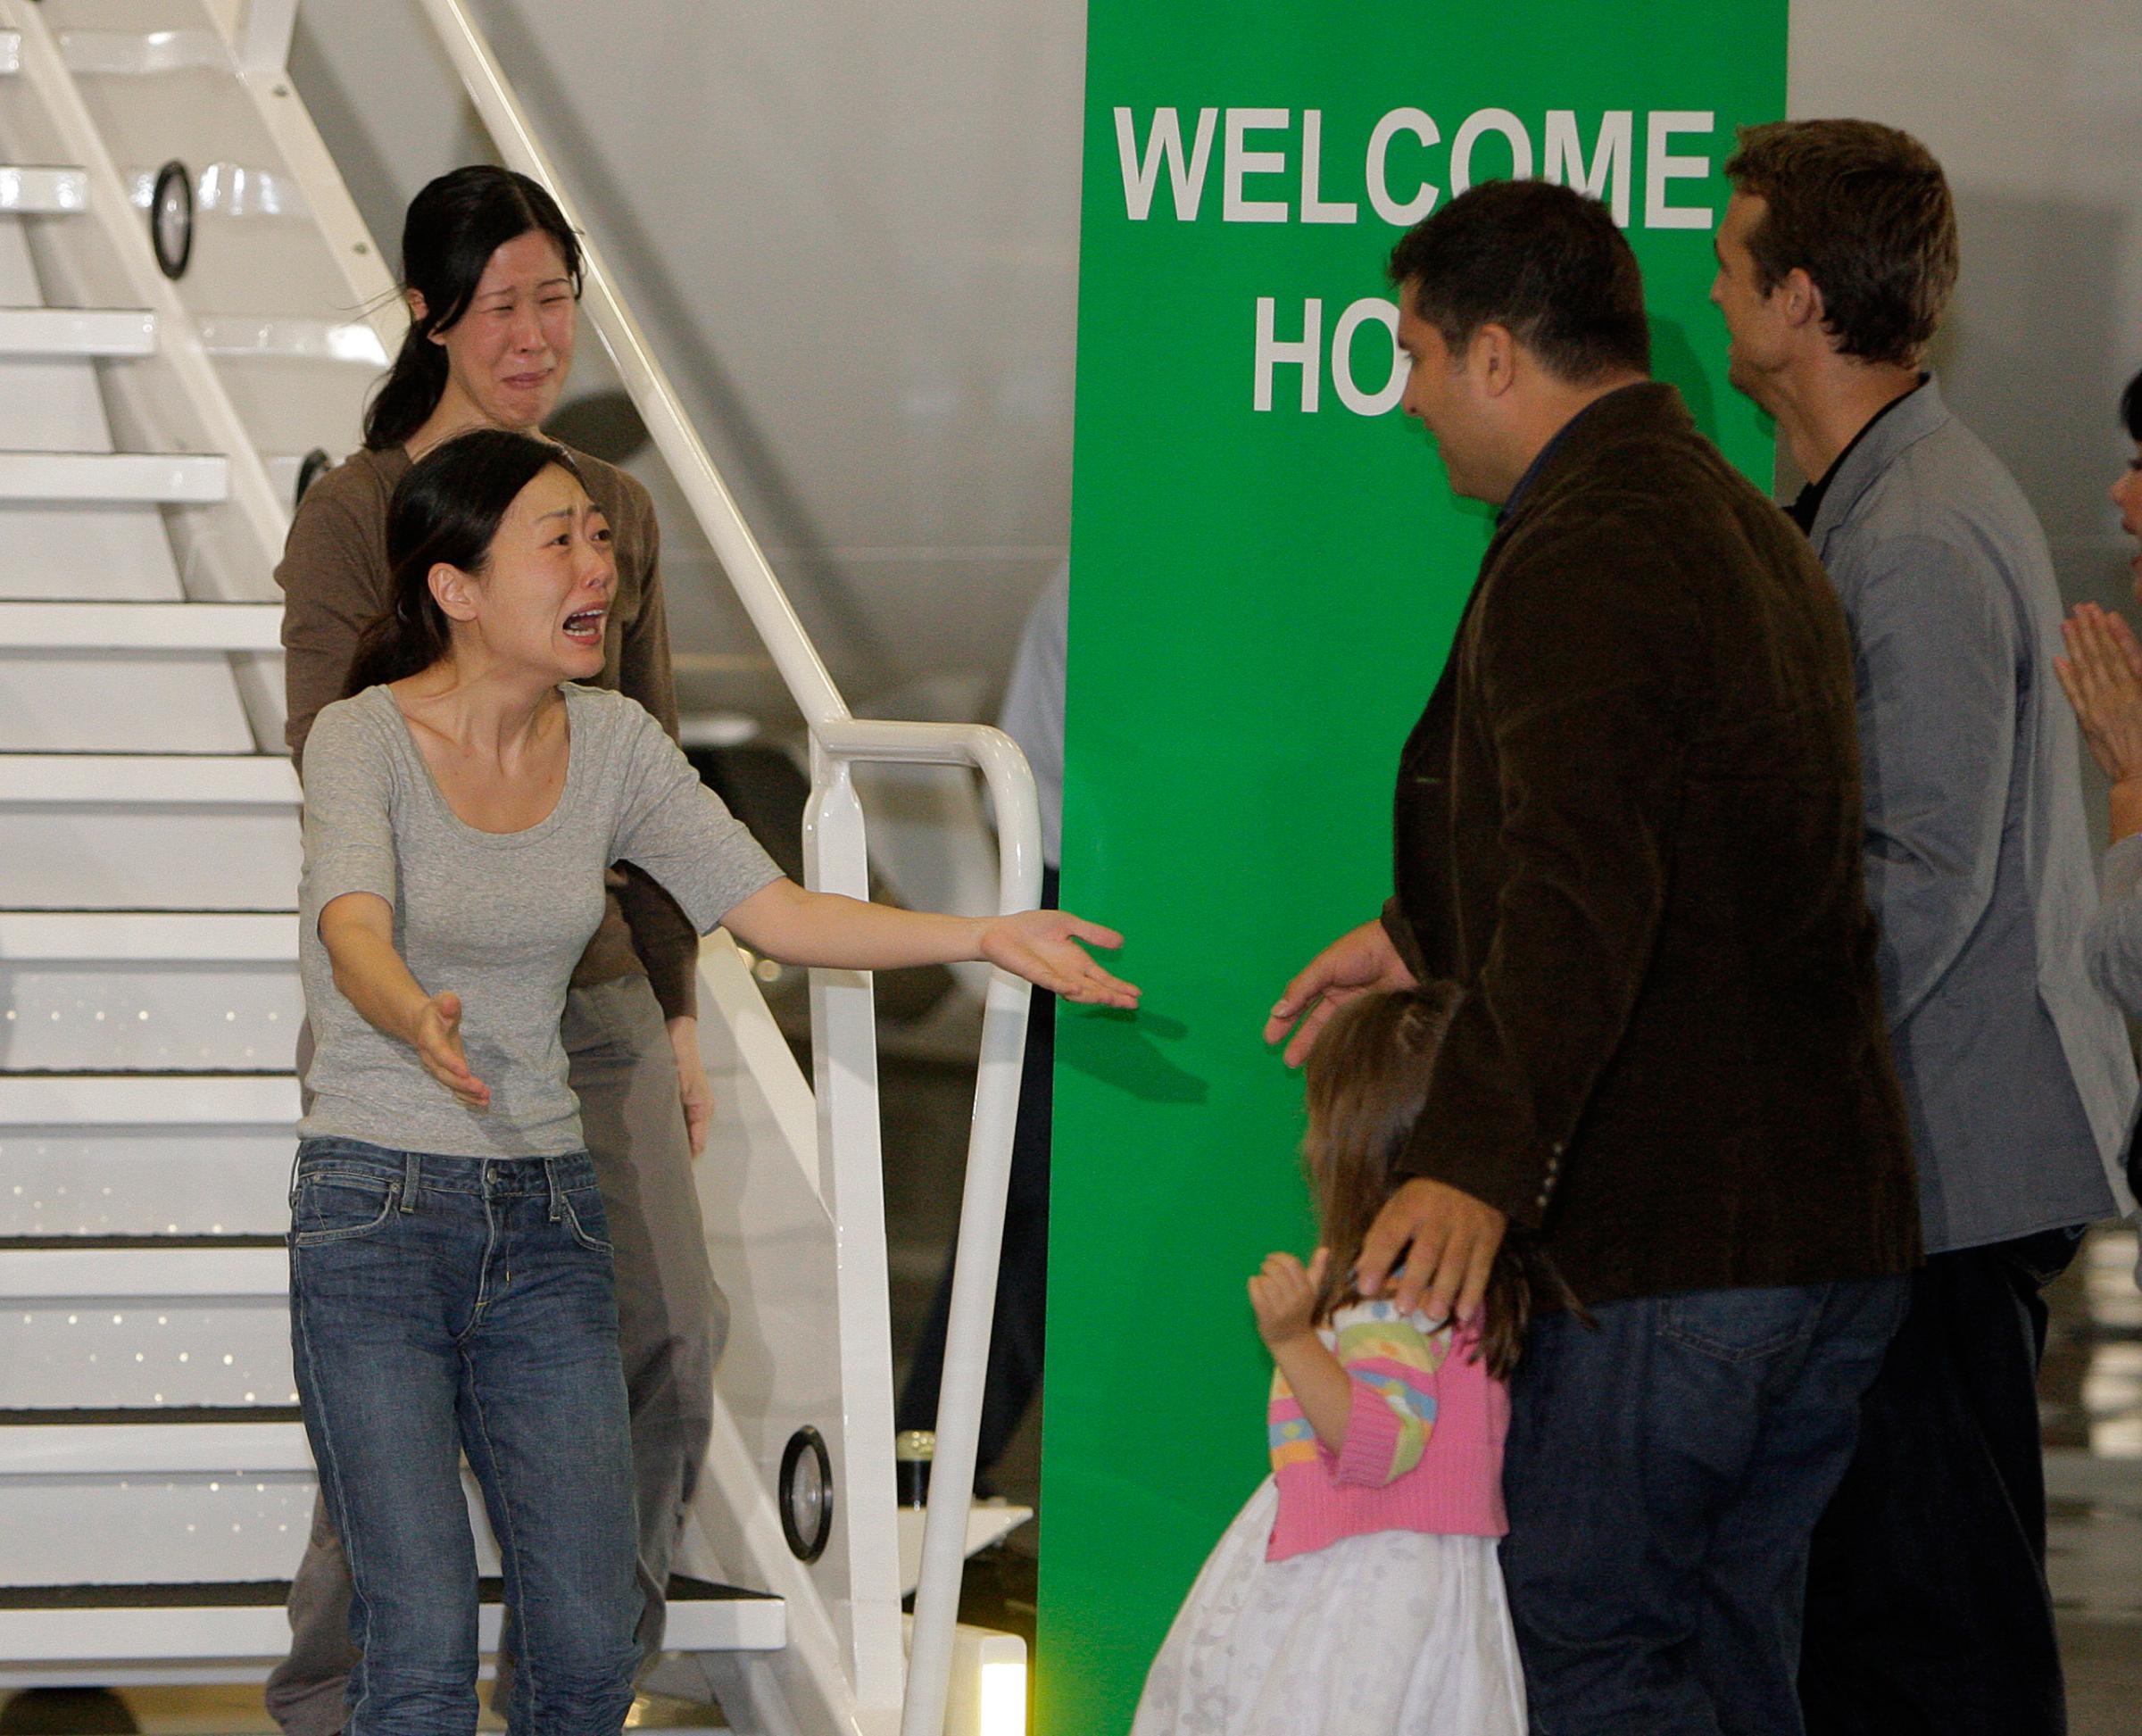 Euna Lee, left, and Laura Ling, are greeted by their husbands after their arrival at Bob Hope Airport in Burbank, Calif., on Aug. 5, 2009. The two American journalists had been arrested that March after allegedly crossing into North Korea from China.